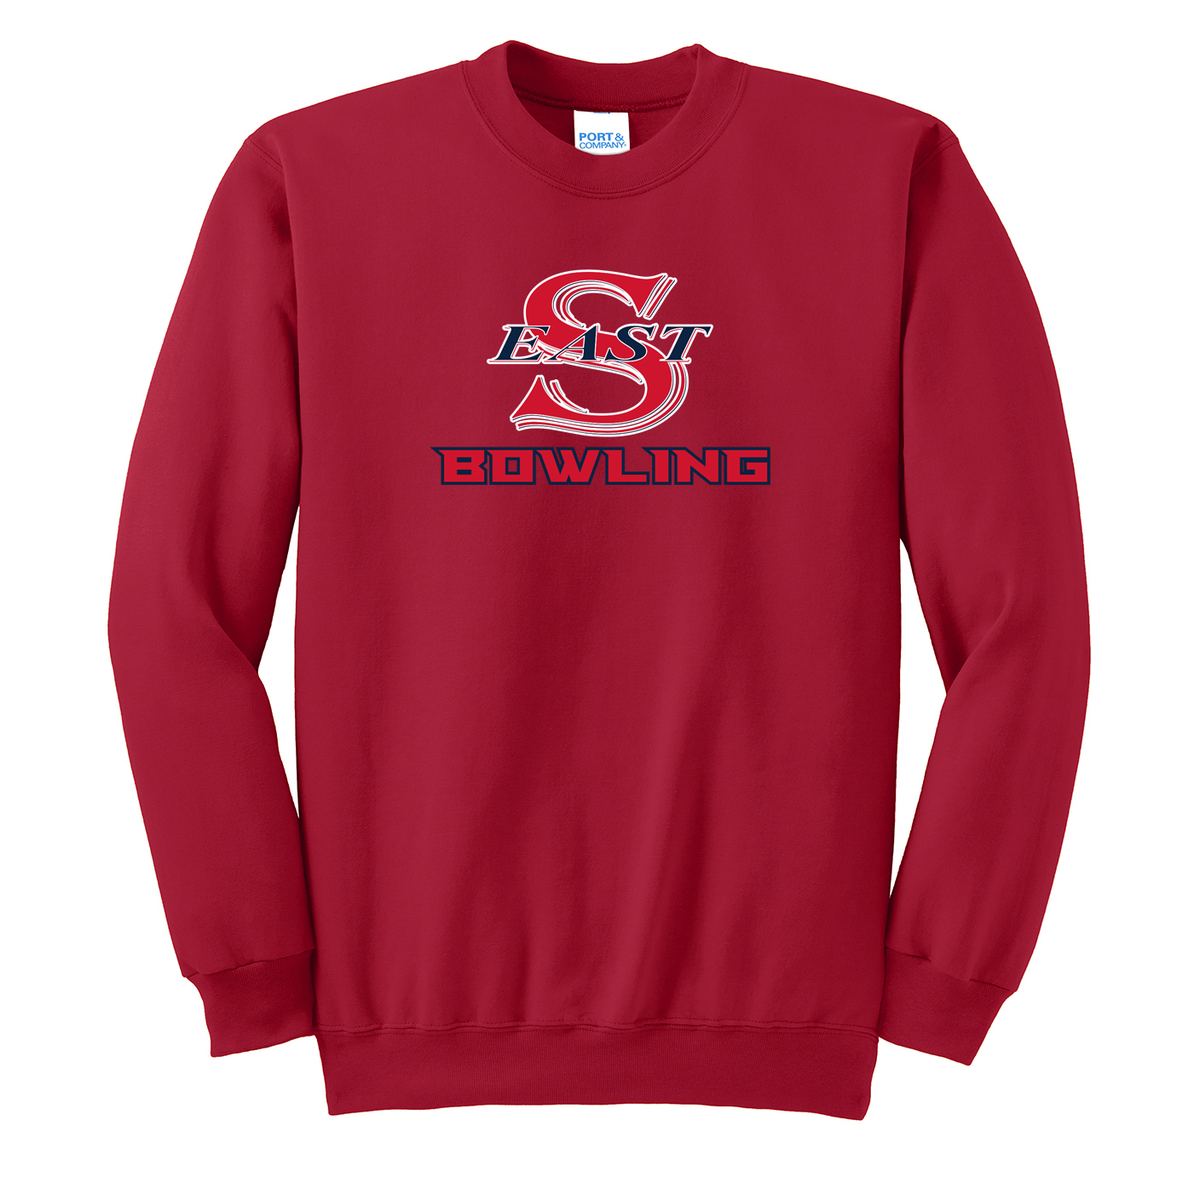 Smithtown East Bowling Crew Neck Sweater